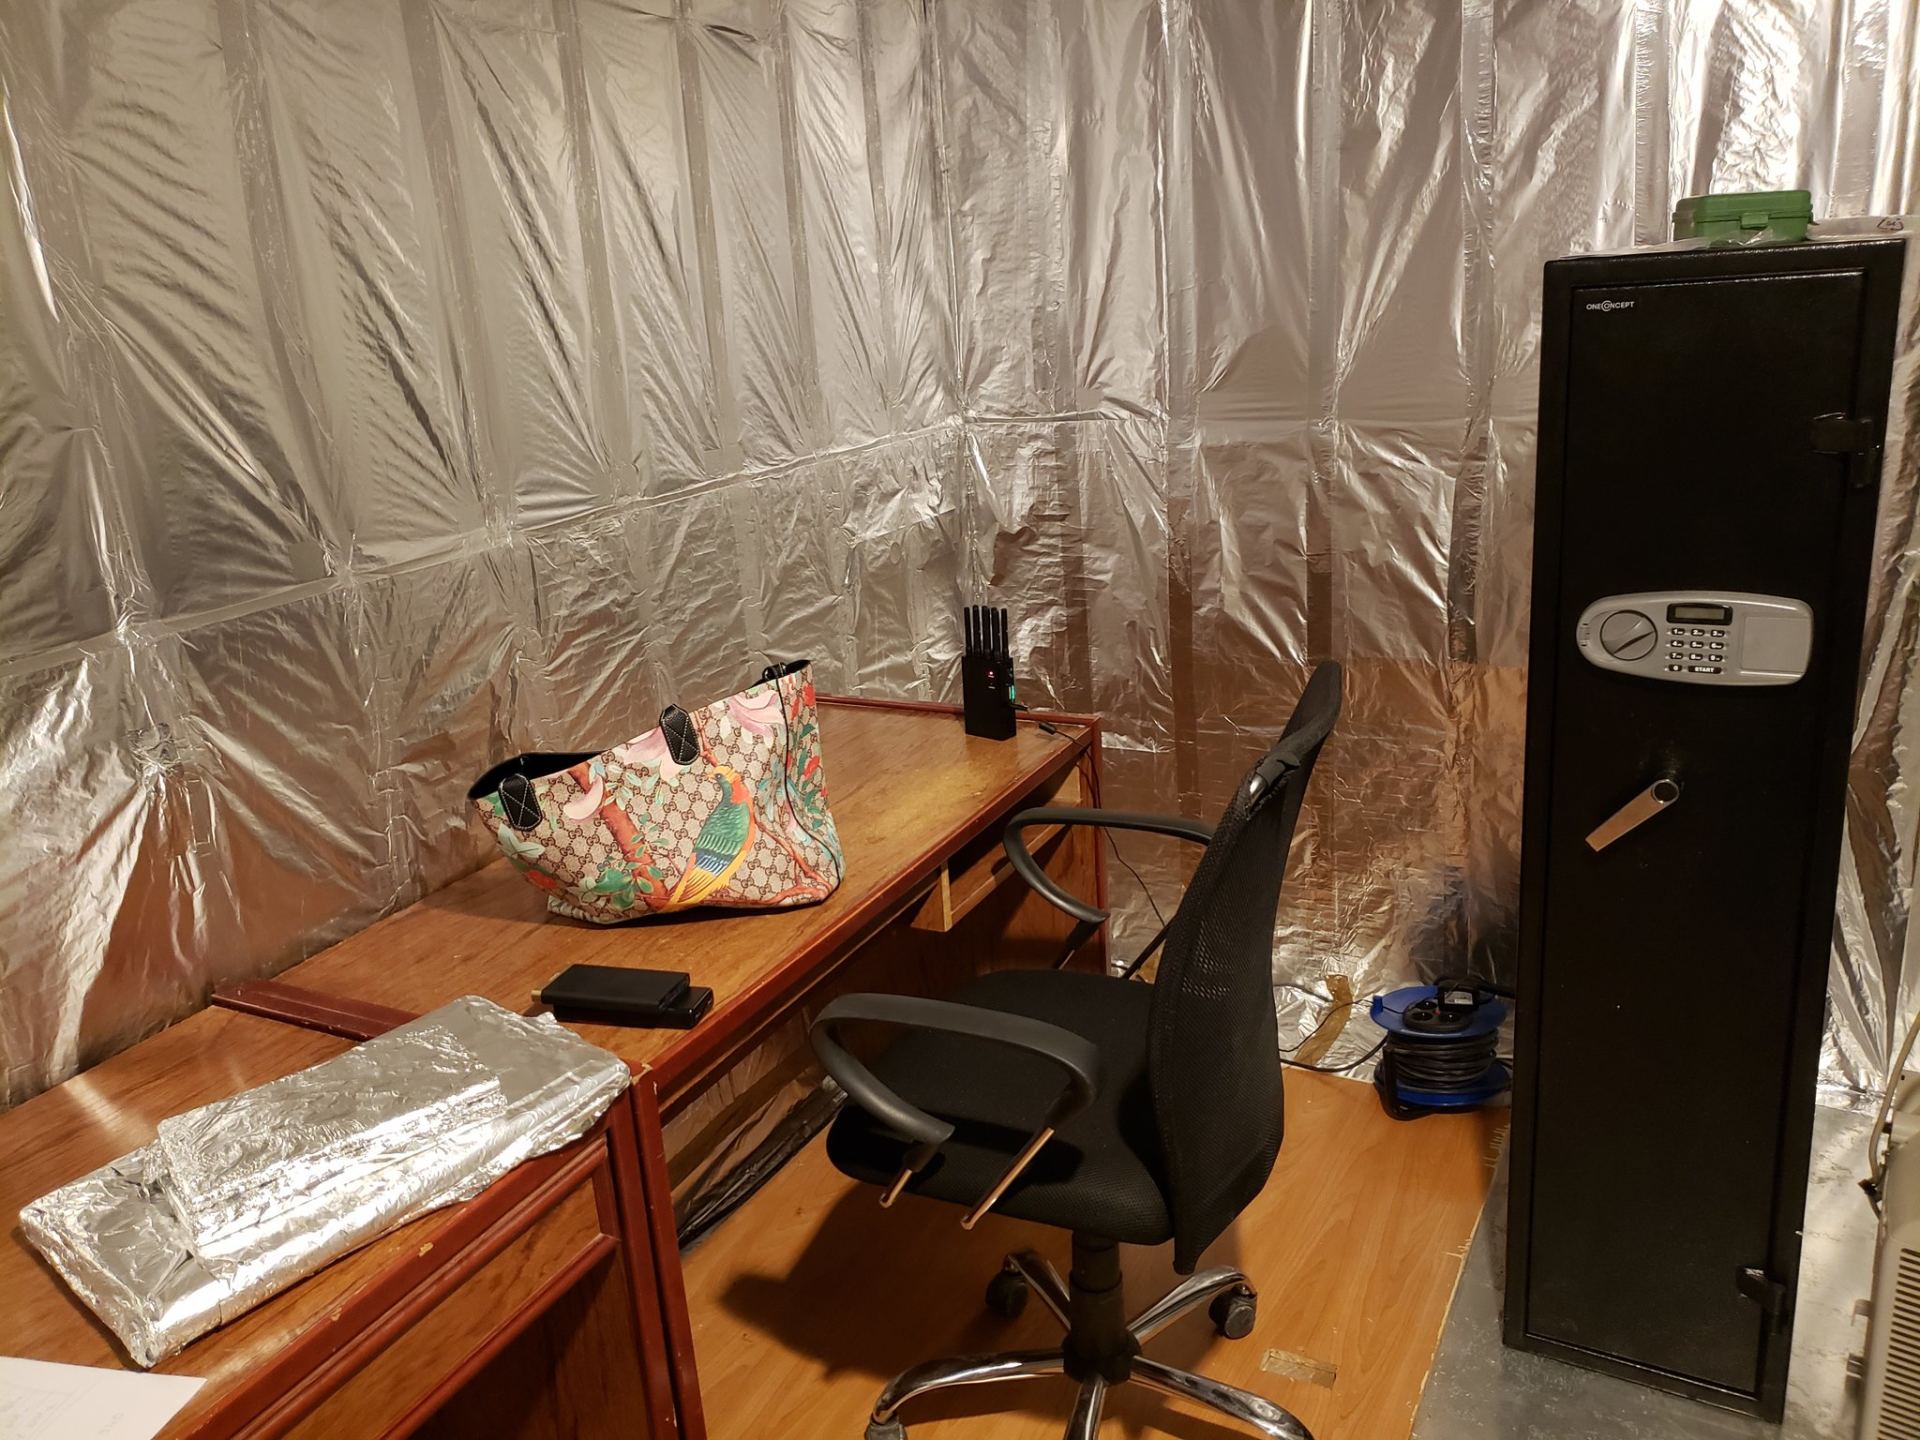 John McAfee built a Faraday cage while on the run to prevent himself from being tracked